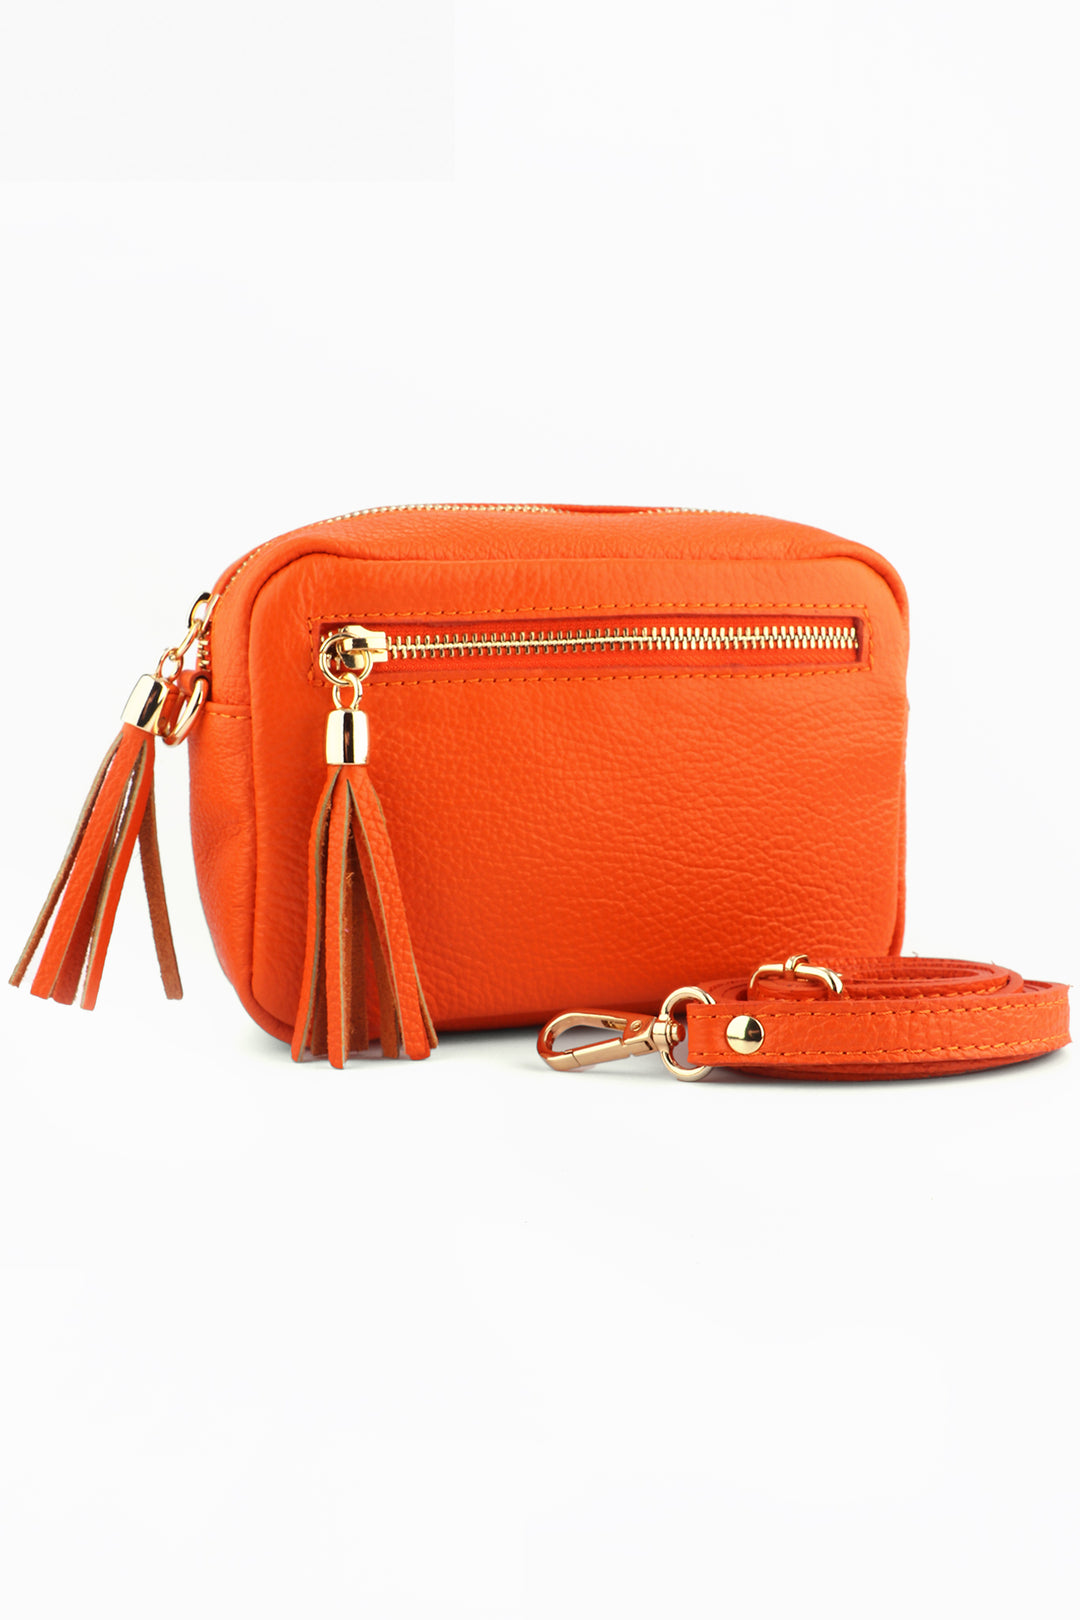 orange leather crossbody camera bag with a front zip pocket and matching detachable bag strap